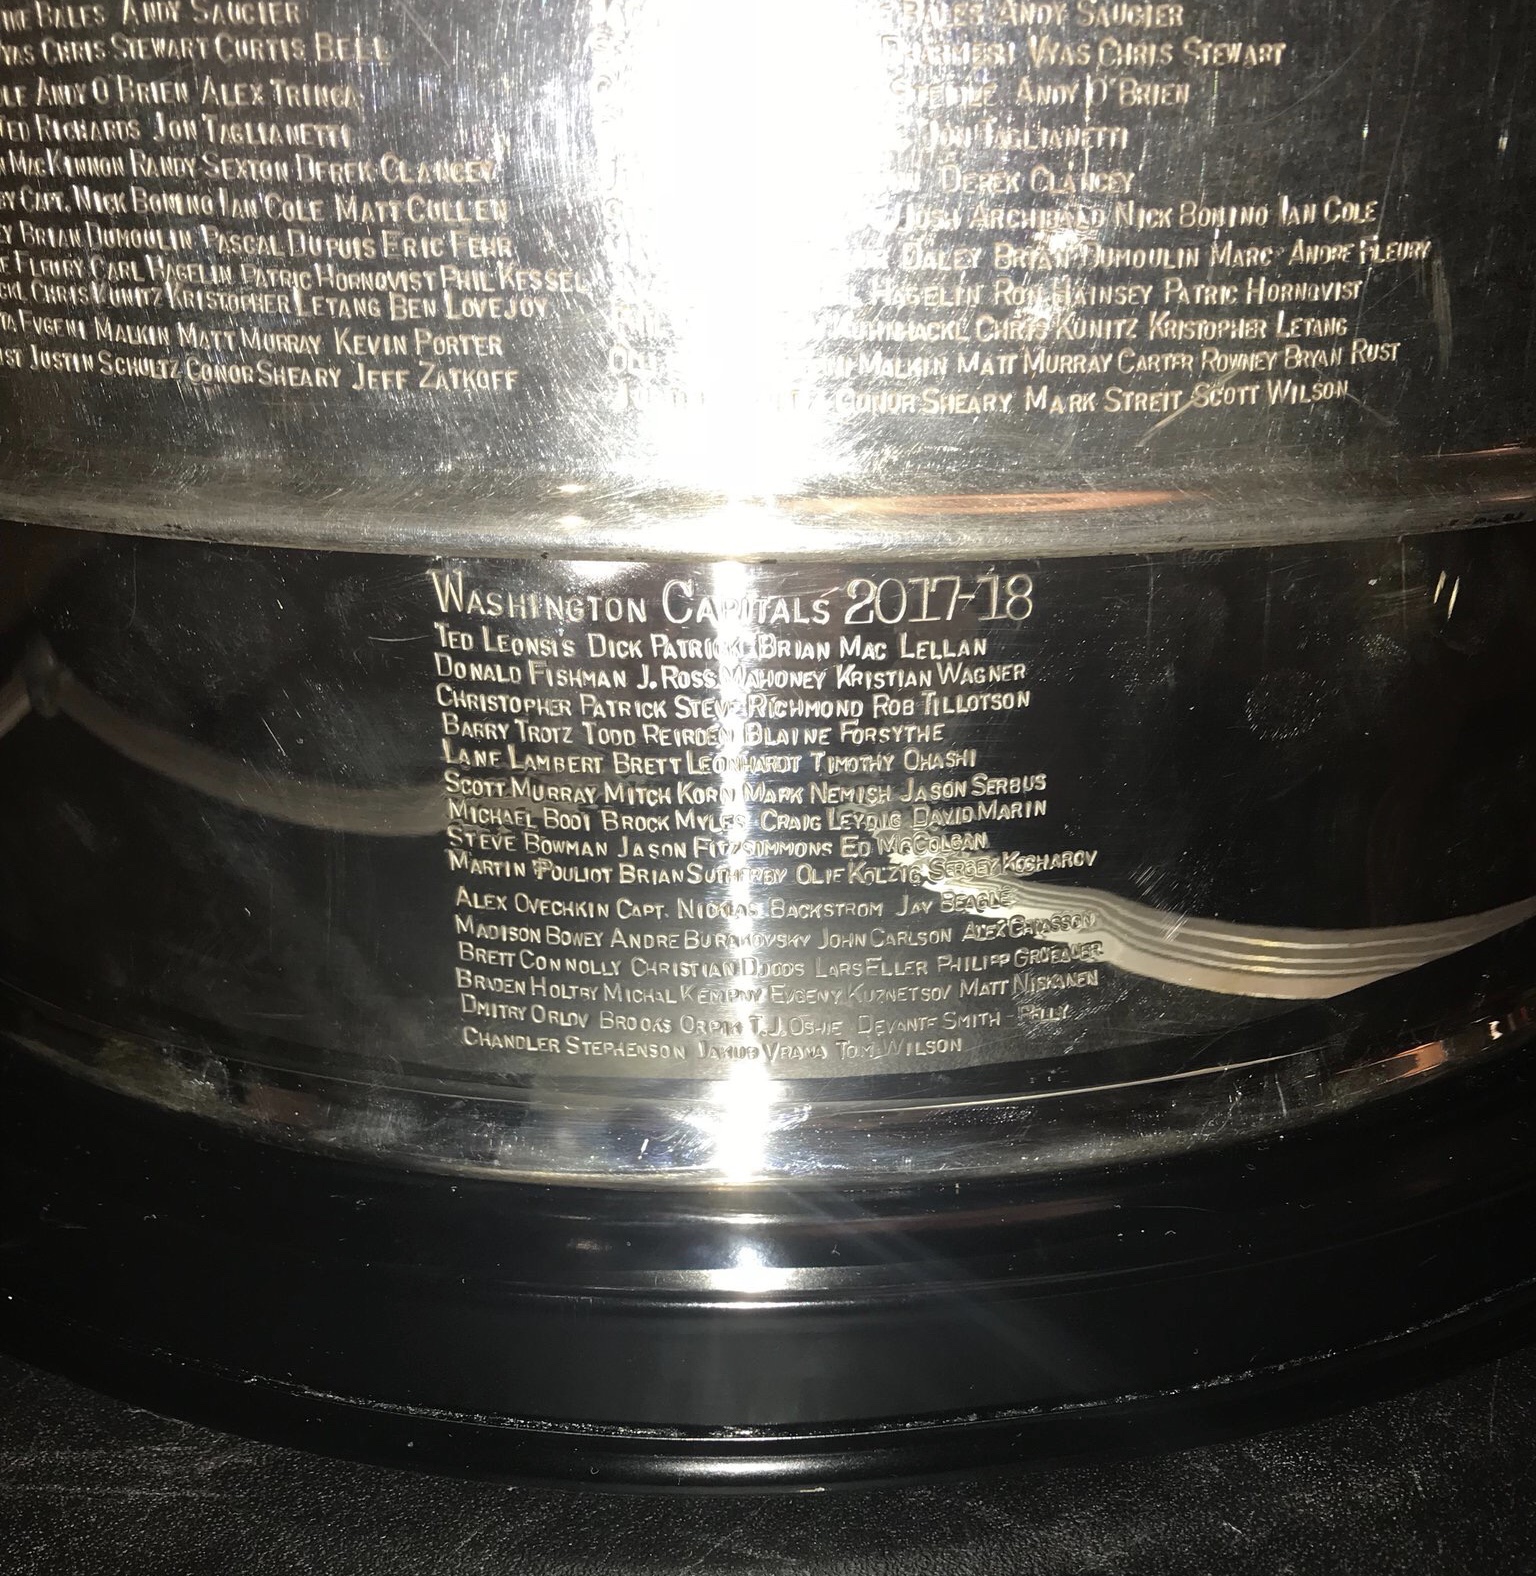 Who Is the Stanley Cup Named After?